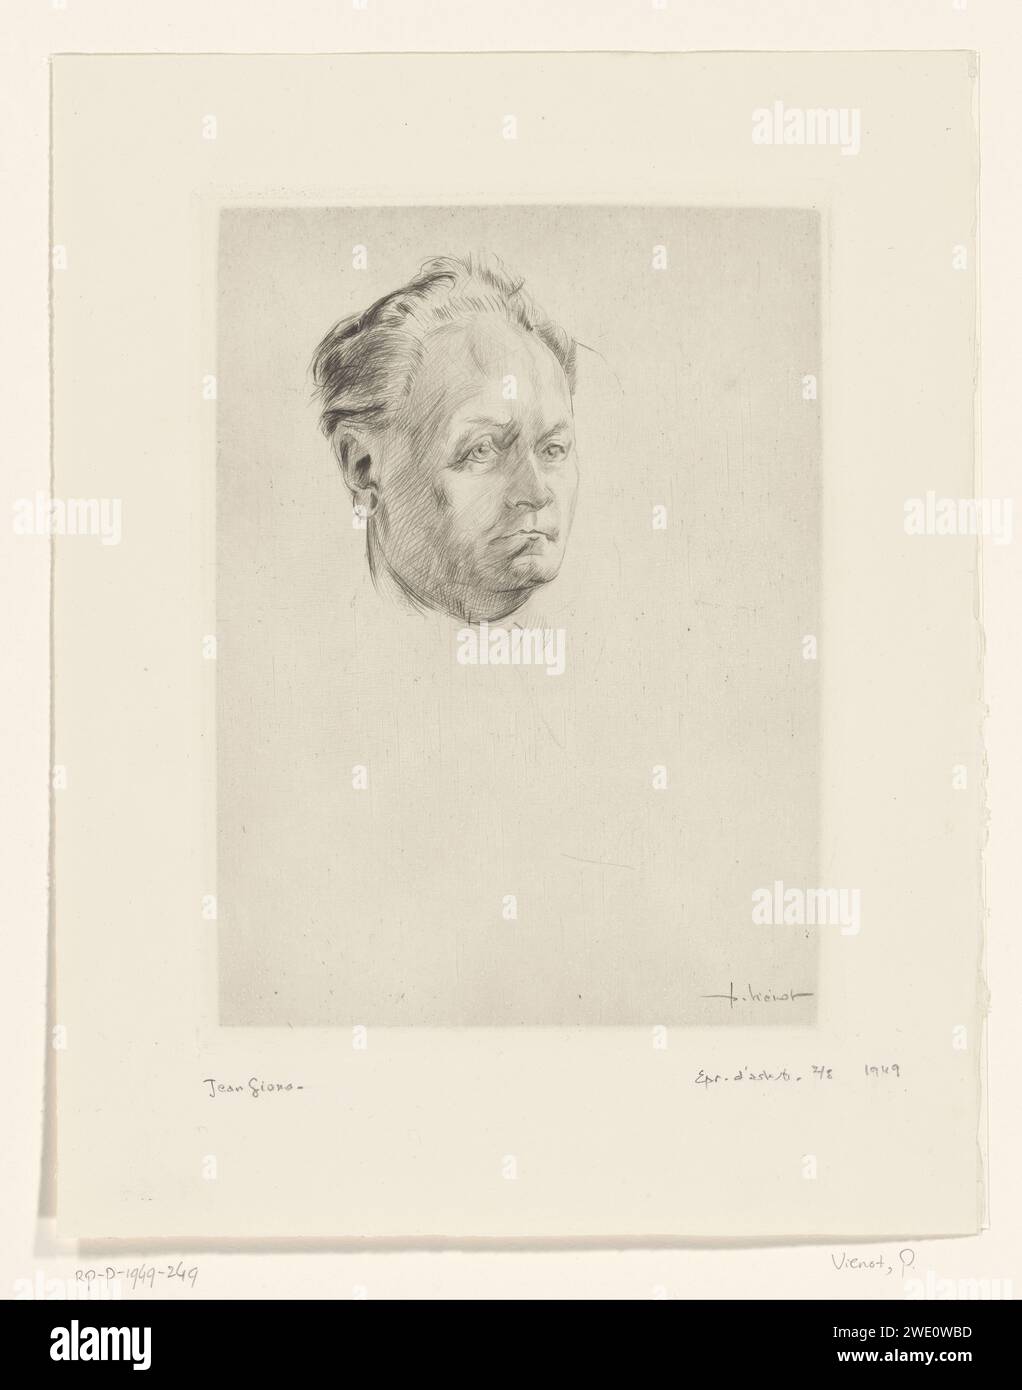 Portret van Jean Giono, Pierre Vienot, 1949 print   paper drypoint historical persons. portrait of a writer Stock Photo